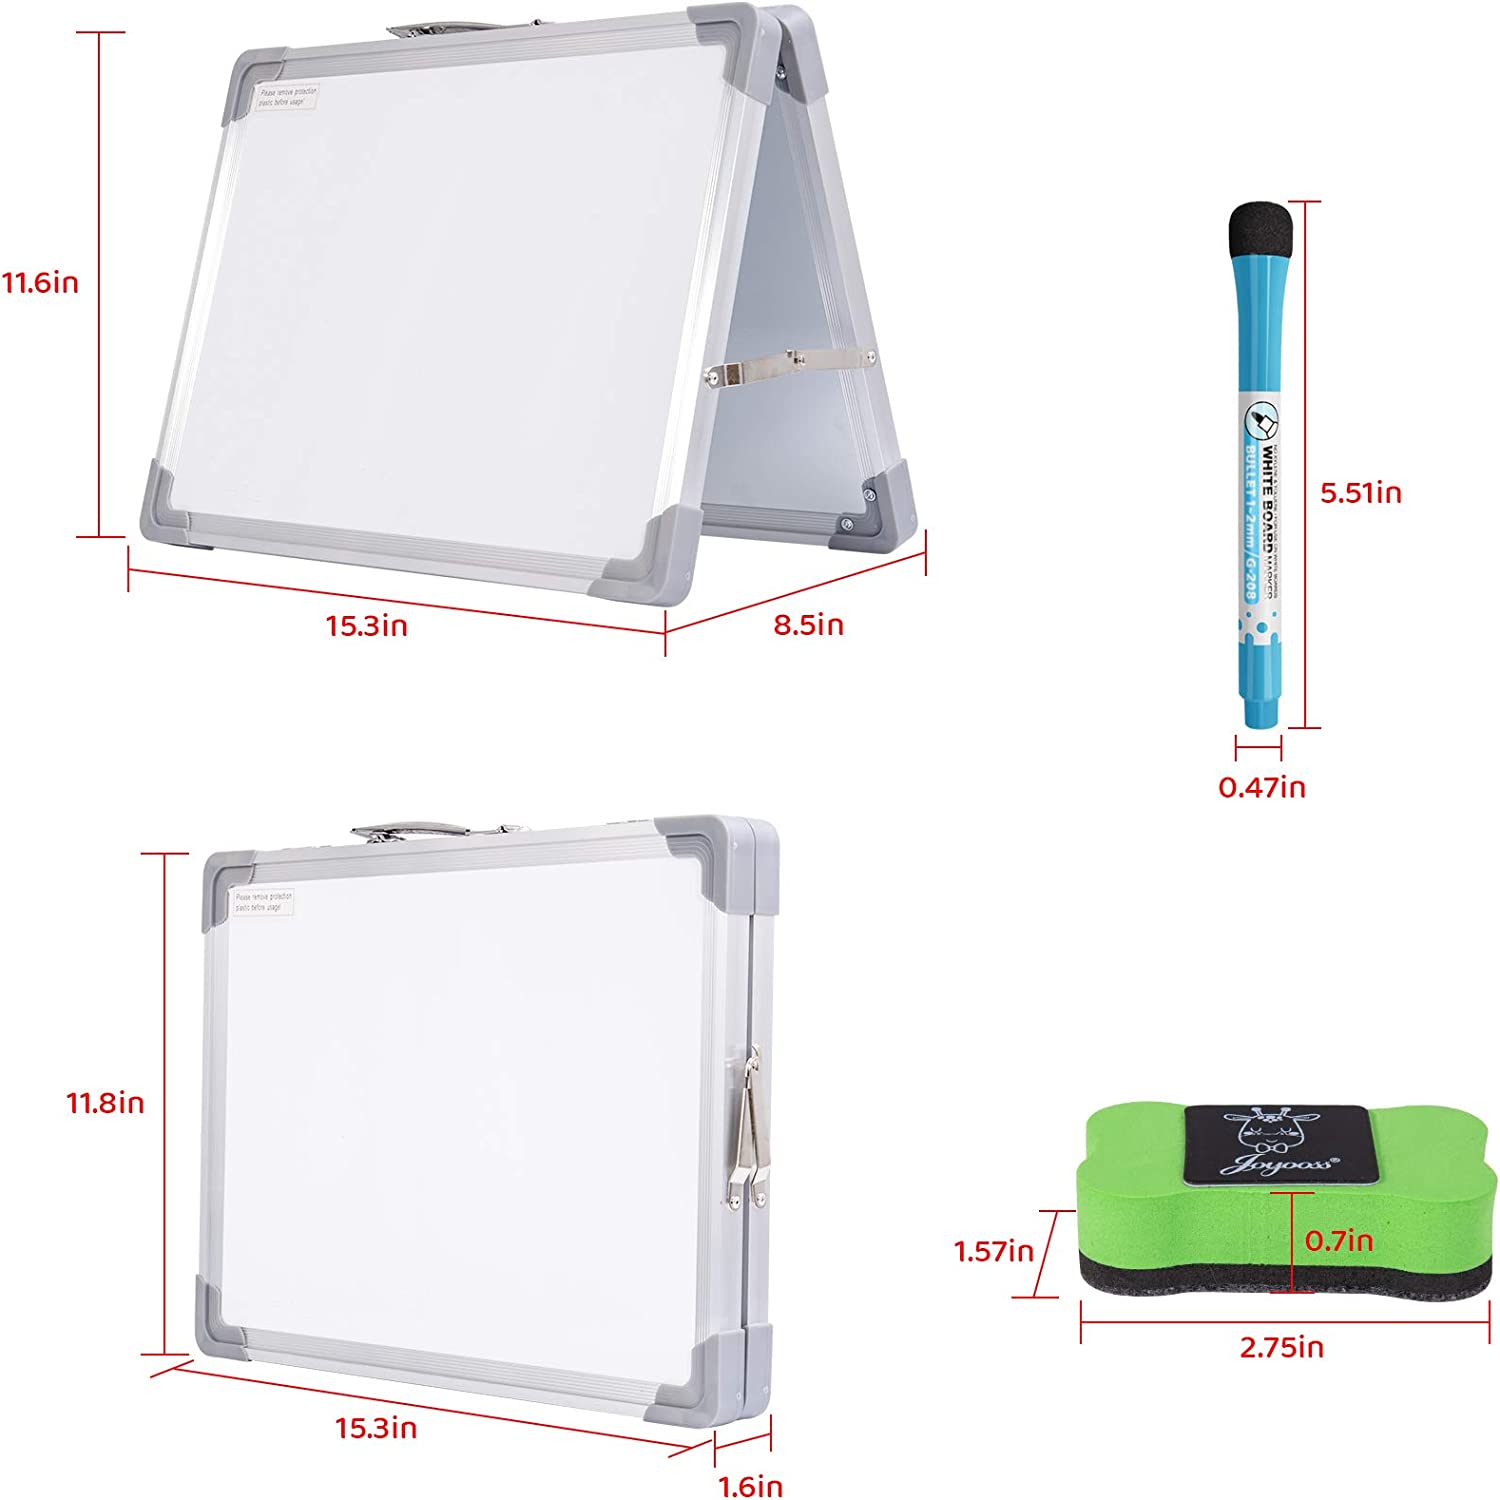 JOYOOSS Magnetic Small Dry Erase Whiteboard, 16” x 12” Foldable Desktop Portable Whiteboard Easel with Magnet Markers Eraser for Home, Office & School